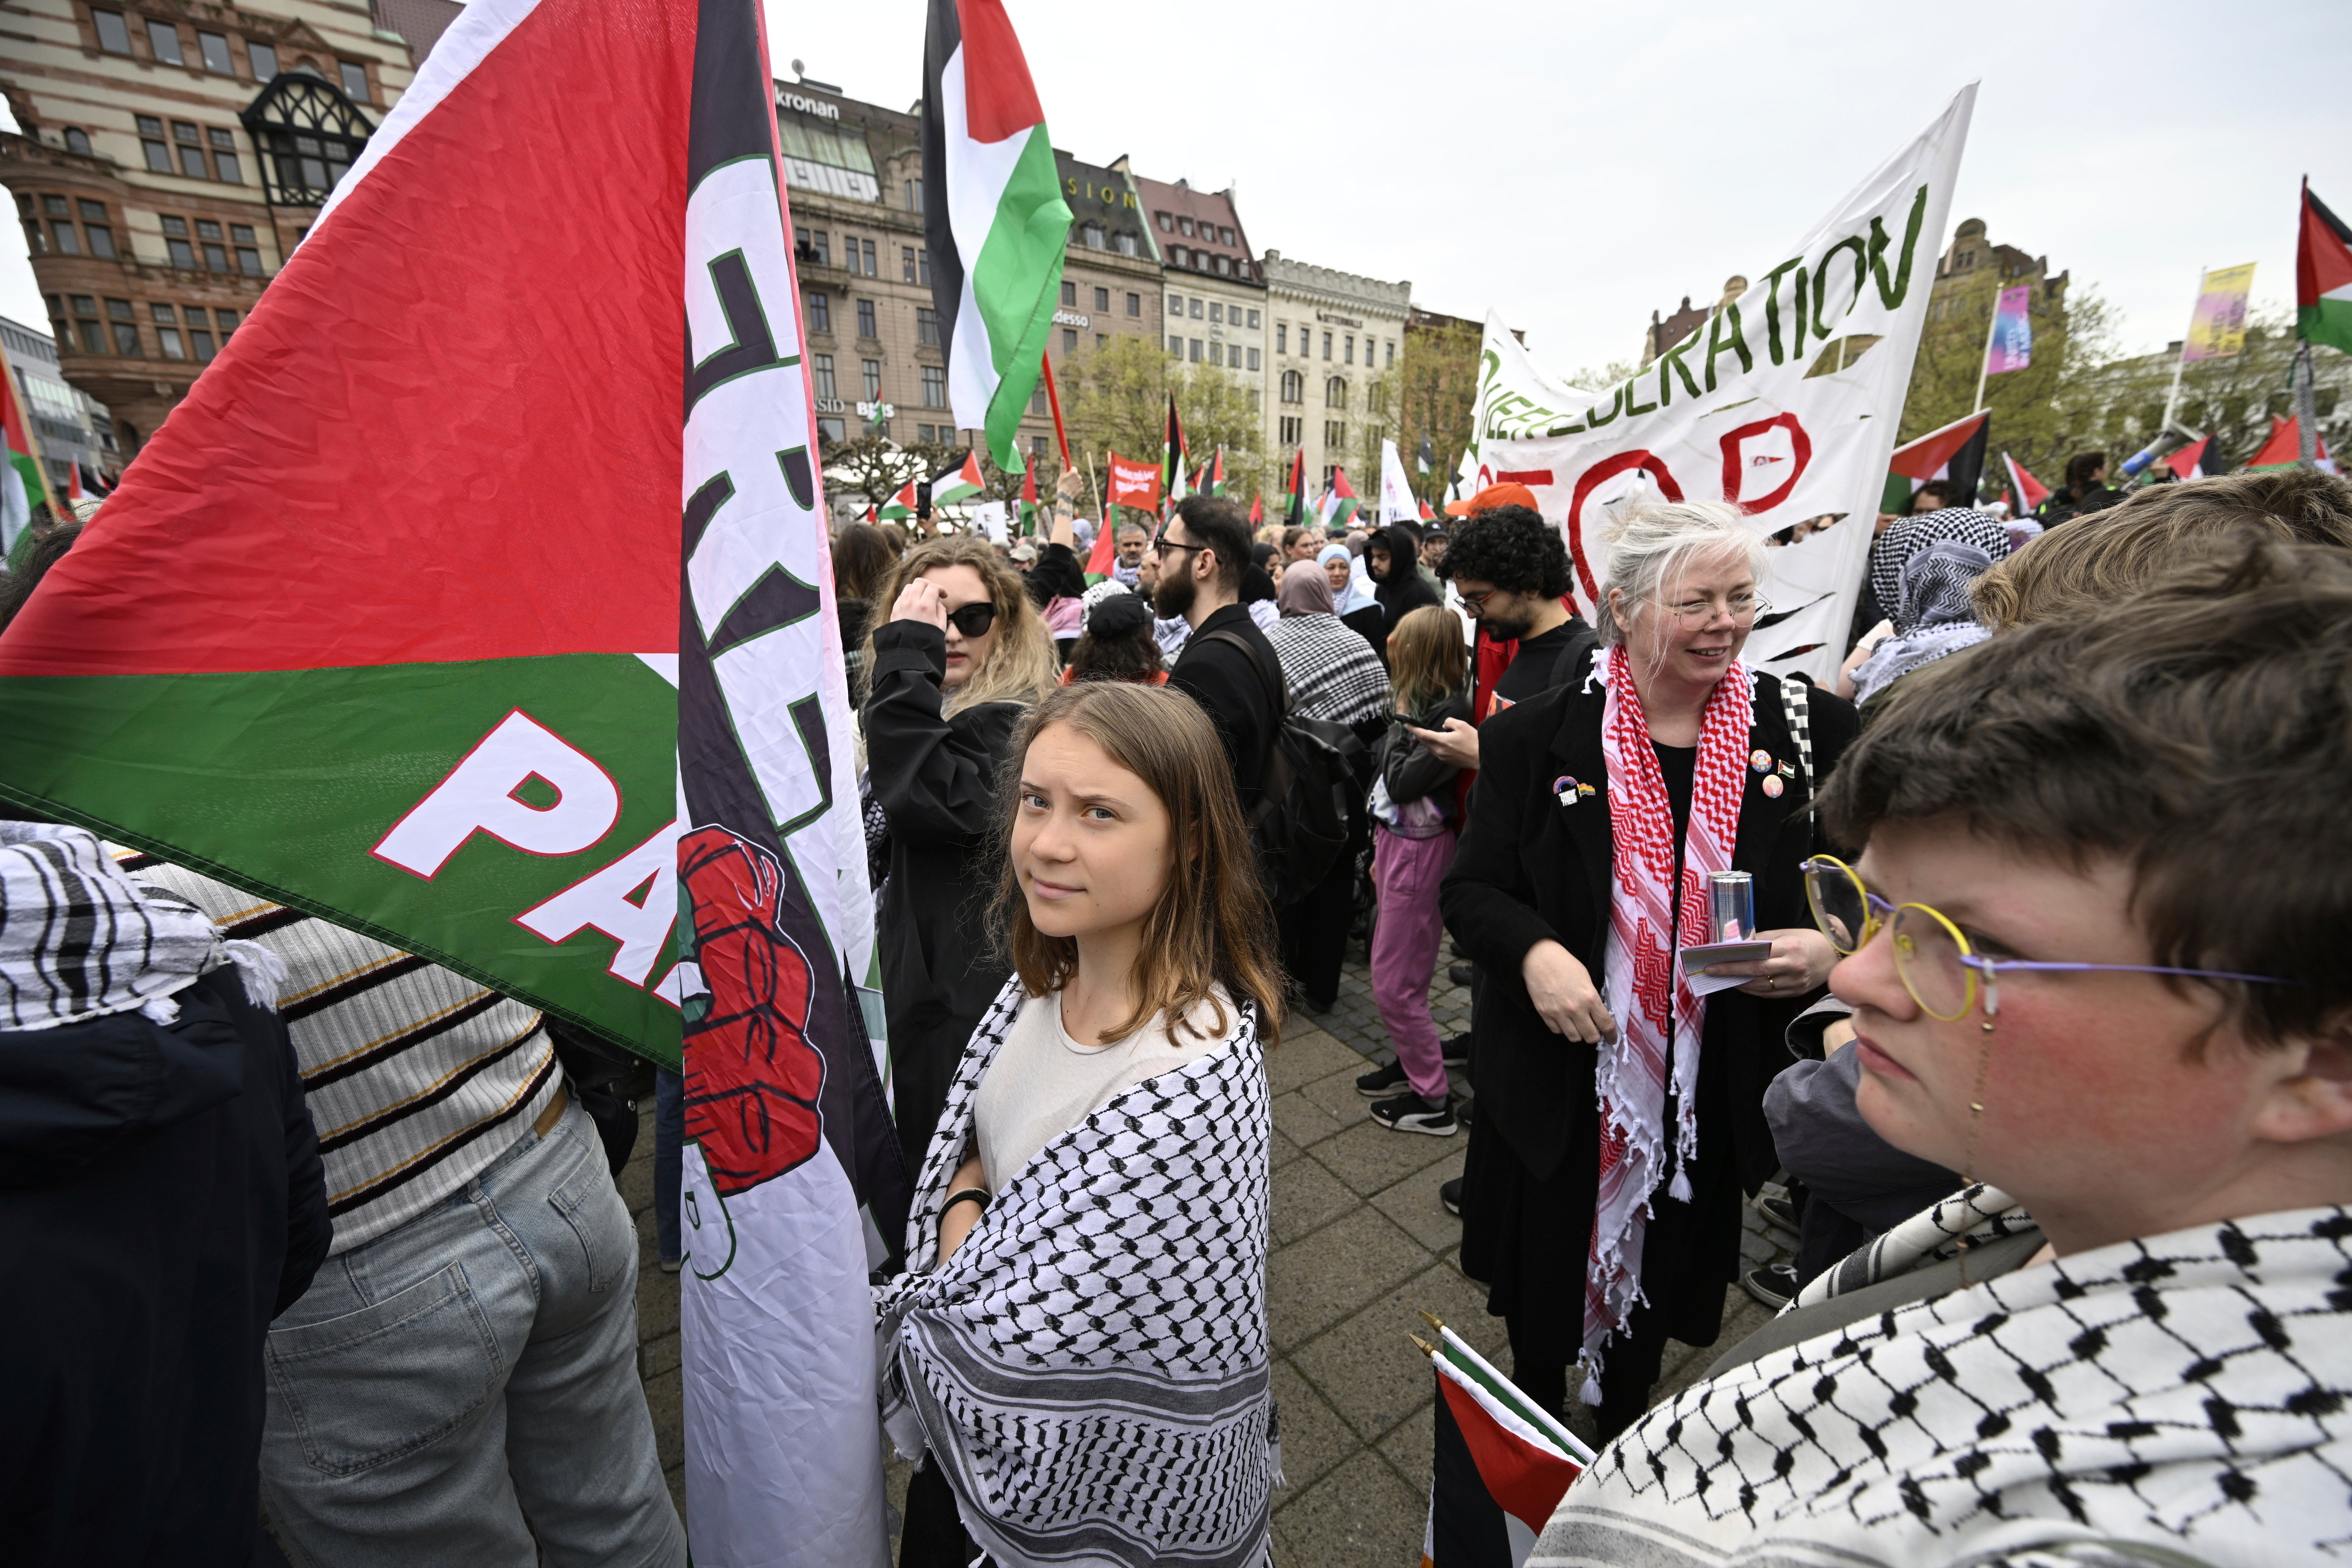 Greta Thunberg joins demonstrators at a pro-Palestine march in Malmo ahead of the Eurovision Song Contest